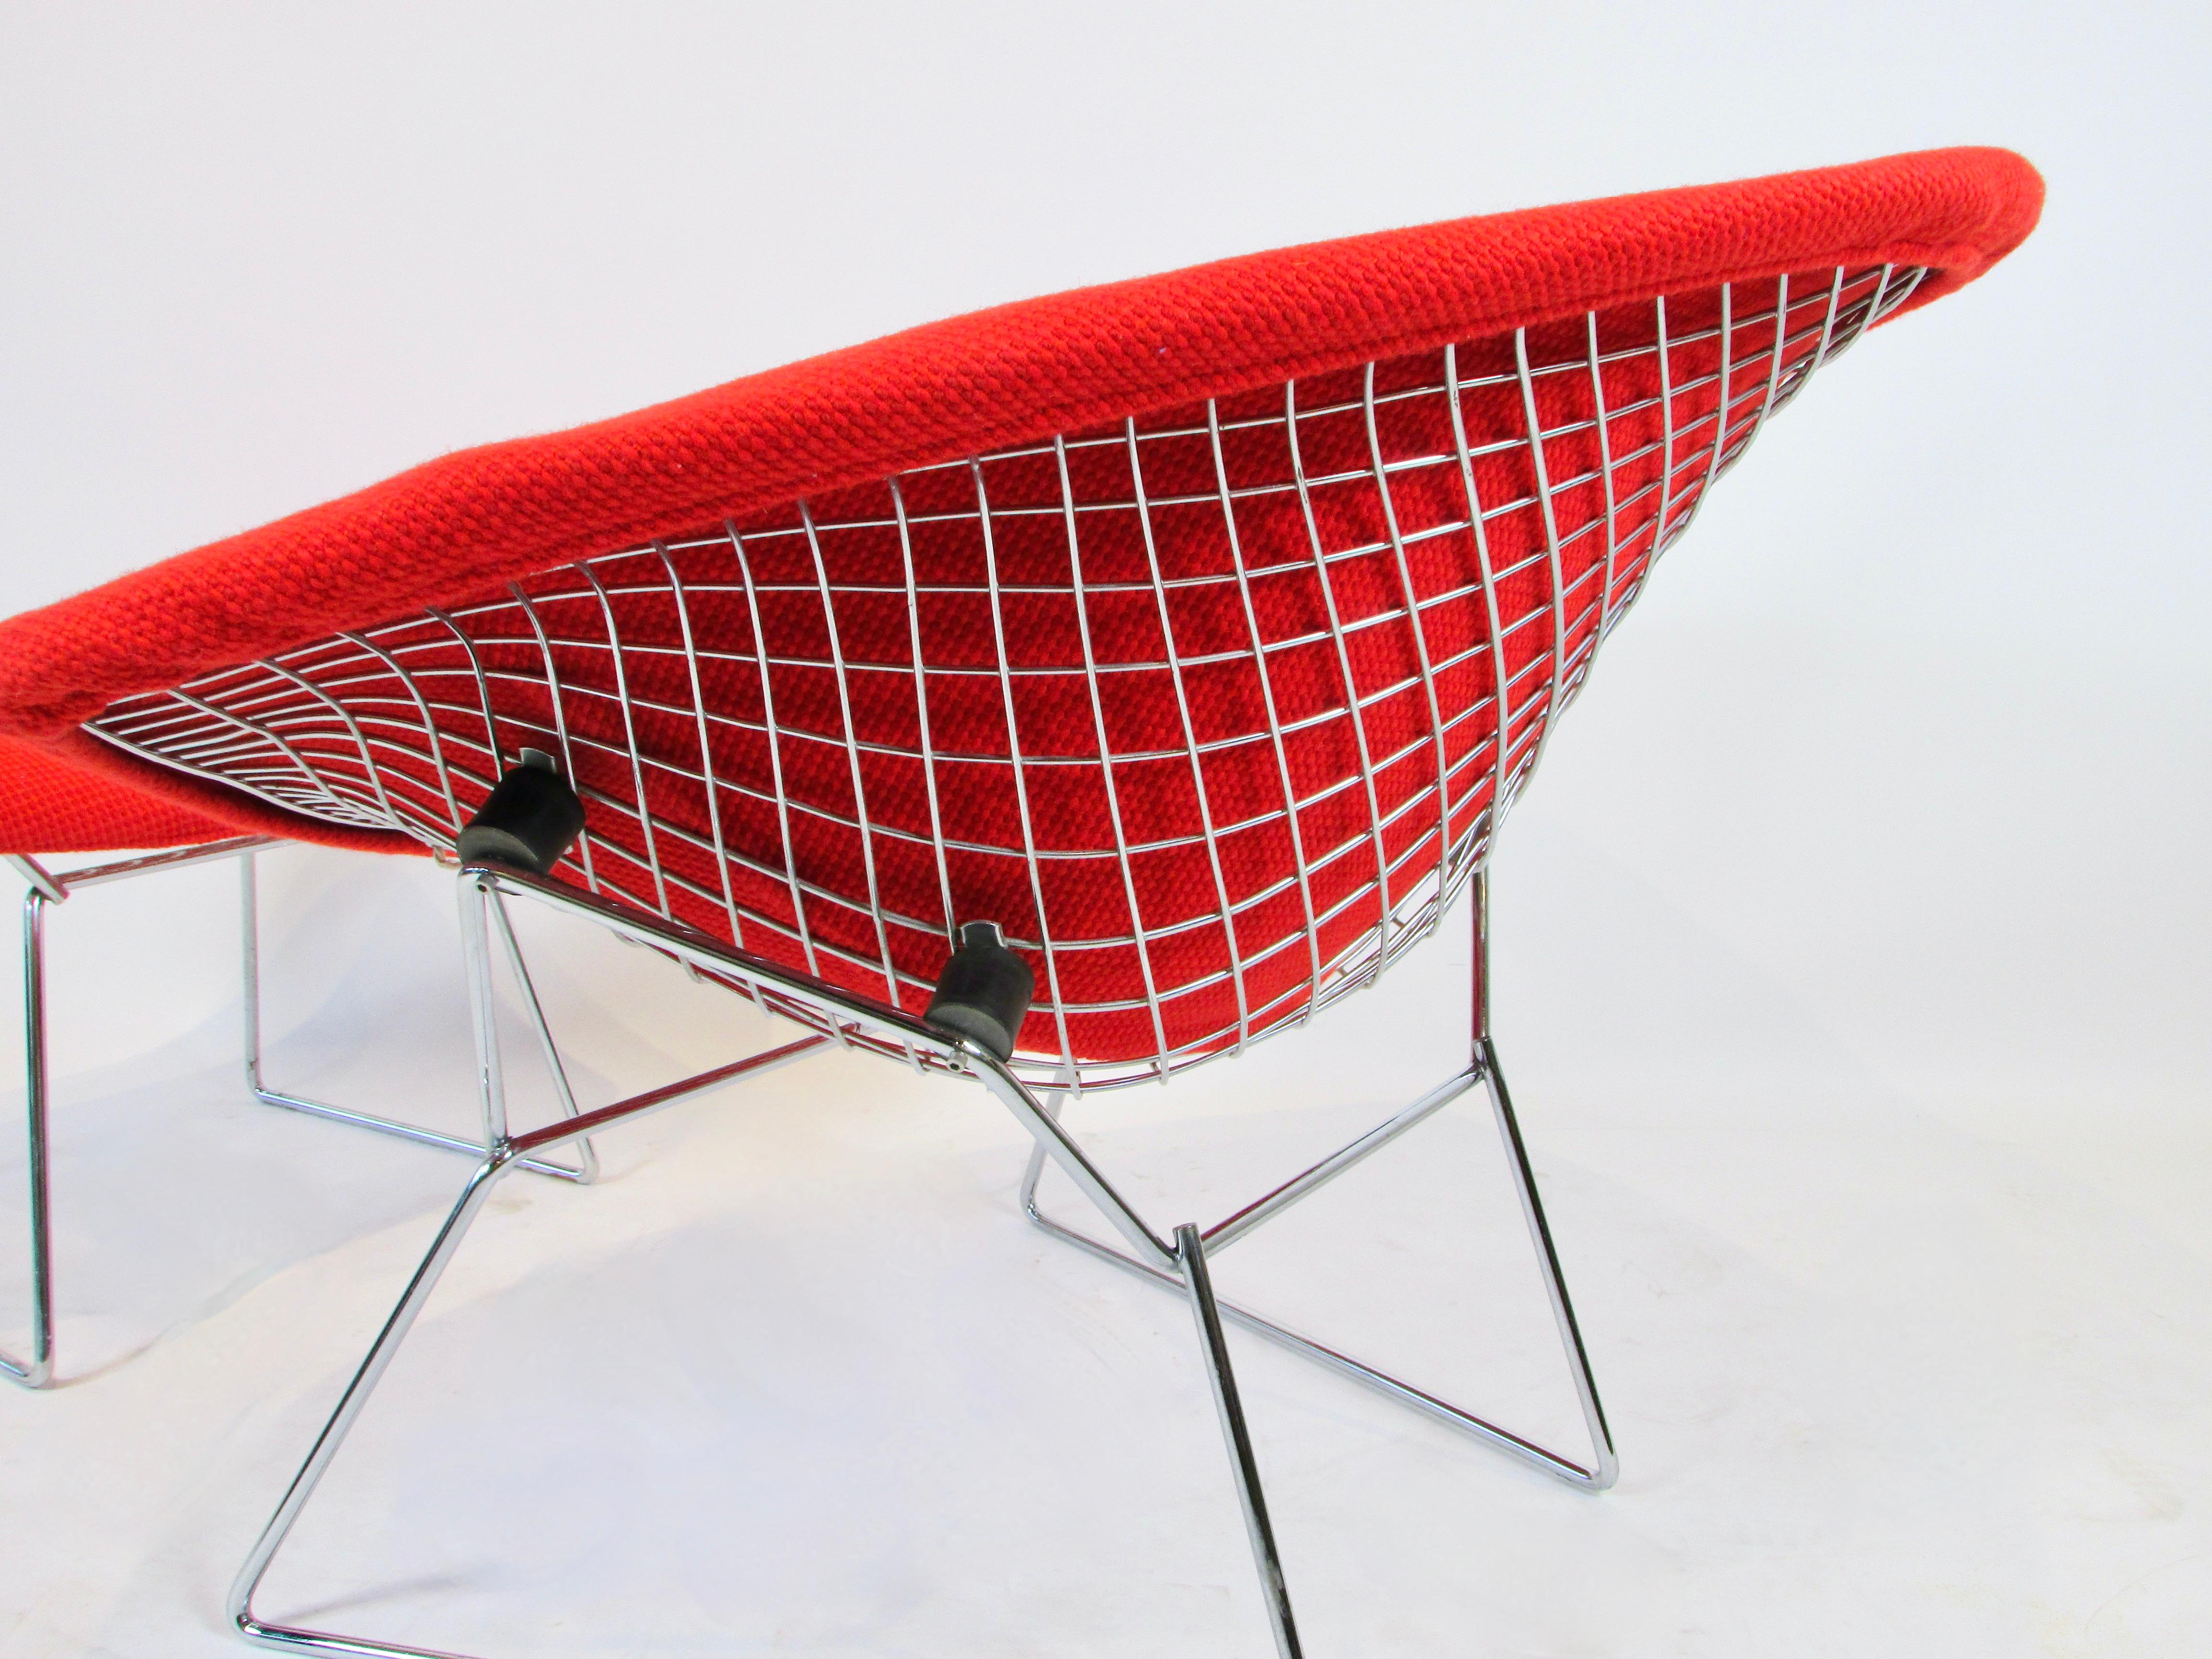 Large Chrome Frame Bertoia Knoll Diamond Chair with Ottoman in Red Cato Textile In Good Condition For Sale In Ferndale, MI